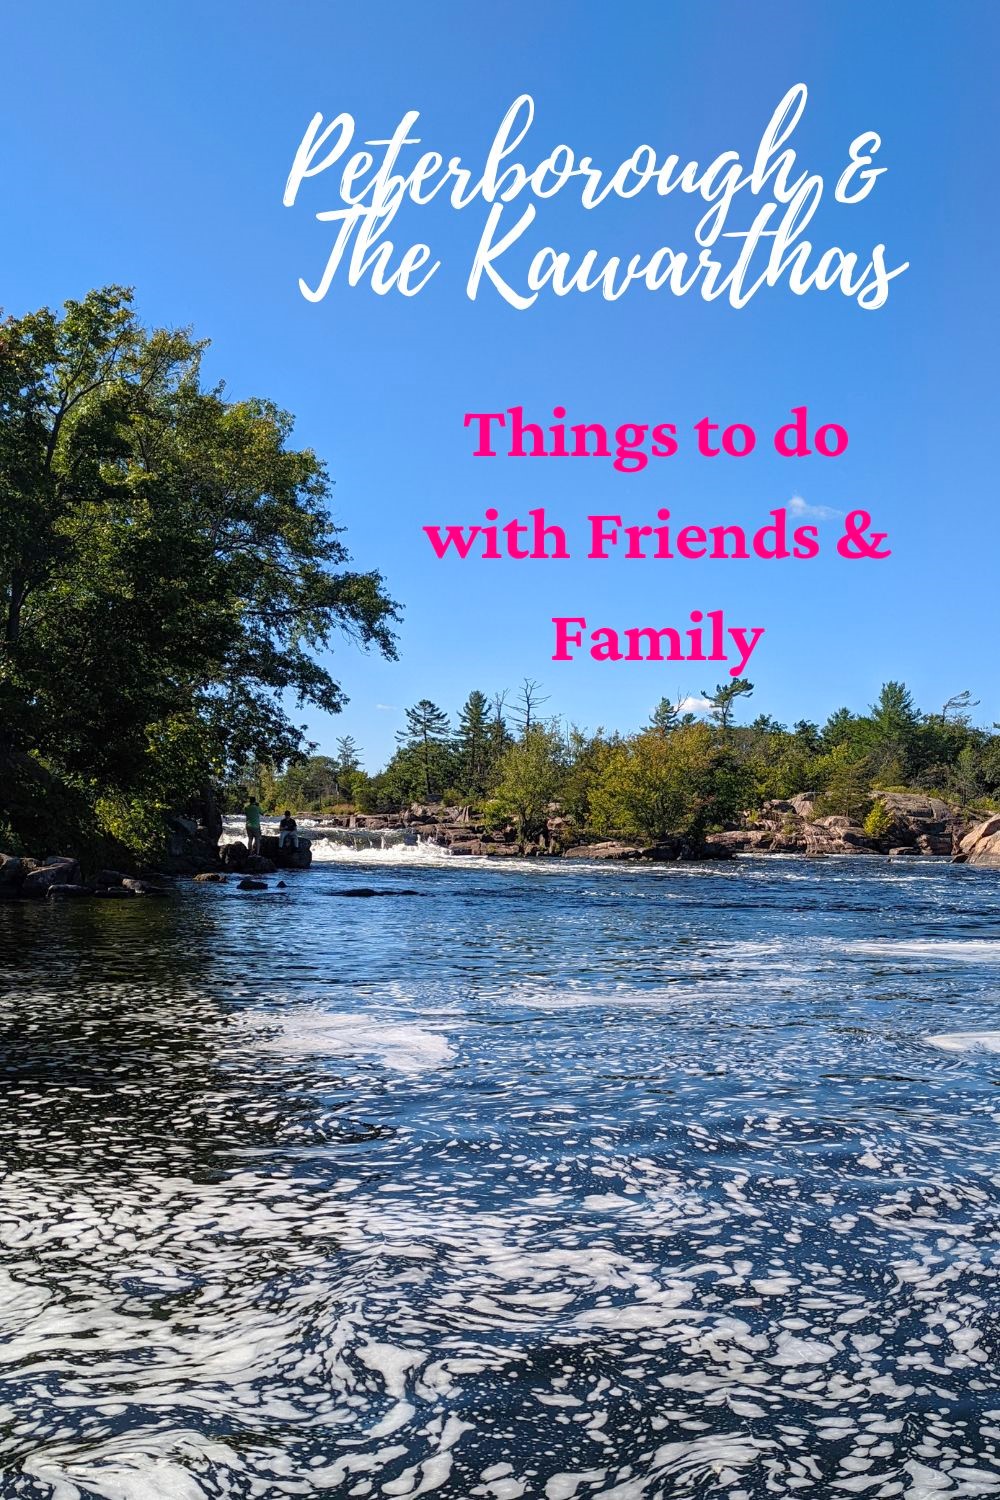 Things to in Peterborough and the Kawarthas